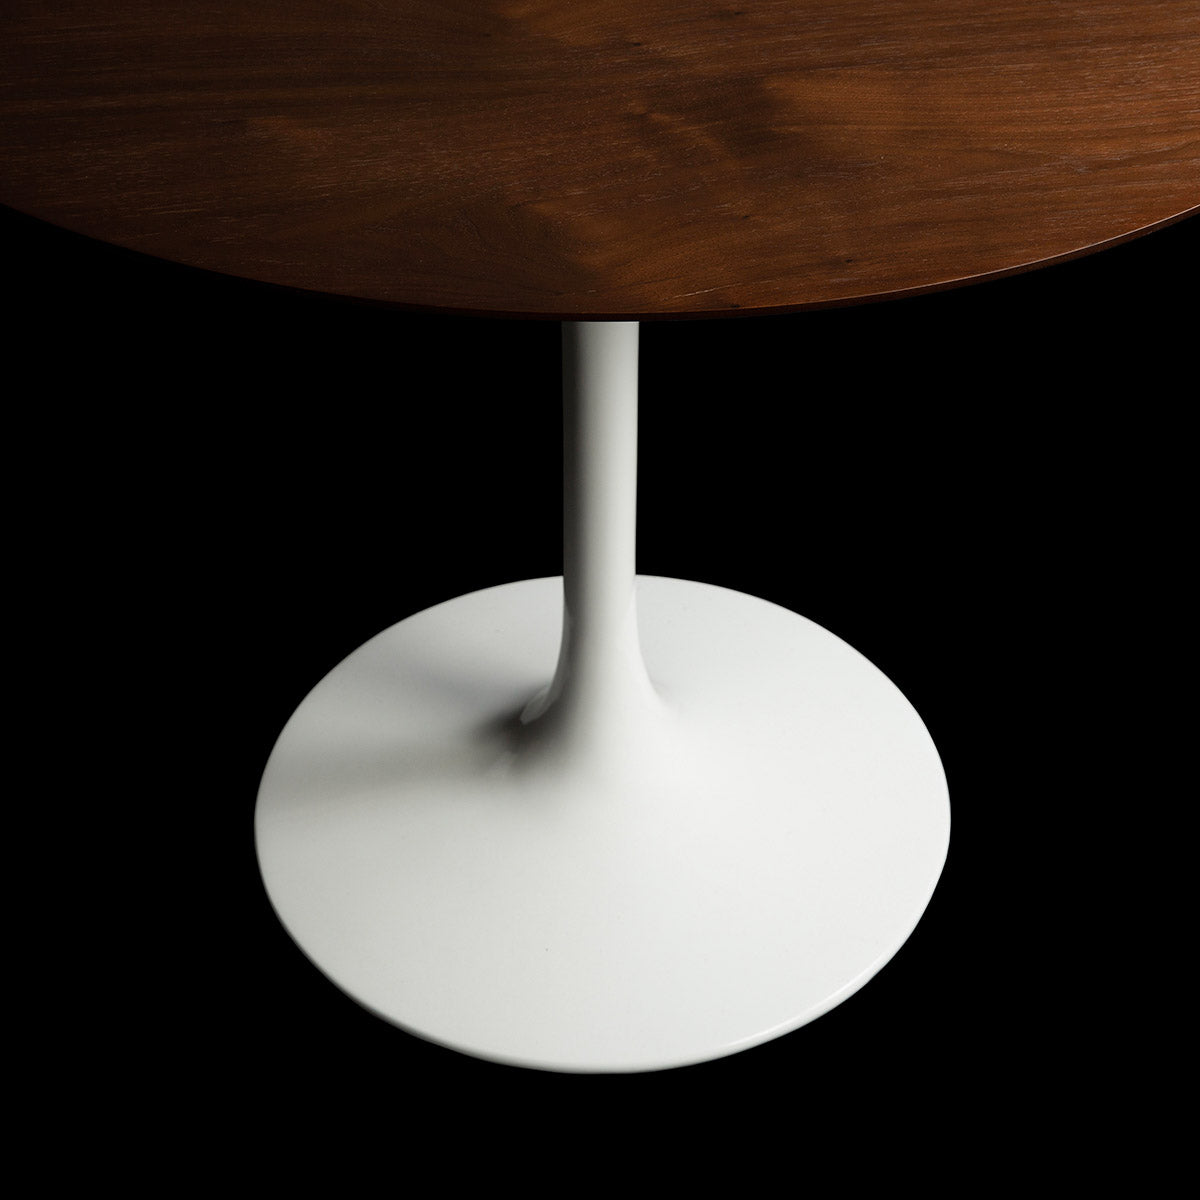 A top down angled view of the circular 90cm Tulip Table with a Natural Walnut Veneer top with beautiful grains evident throughout, on a black backdrop